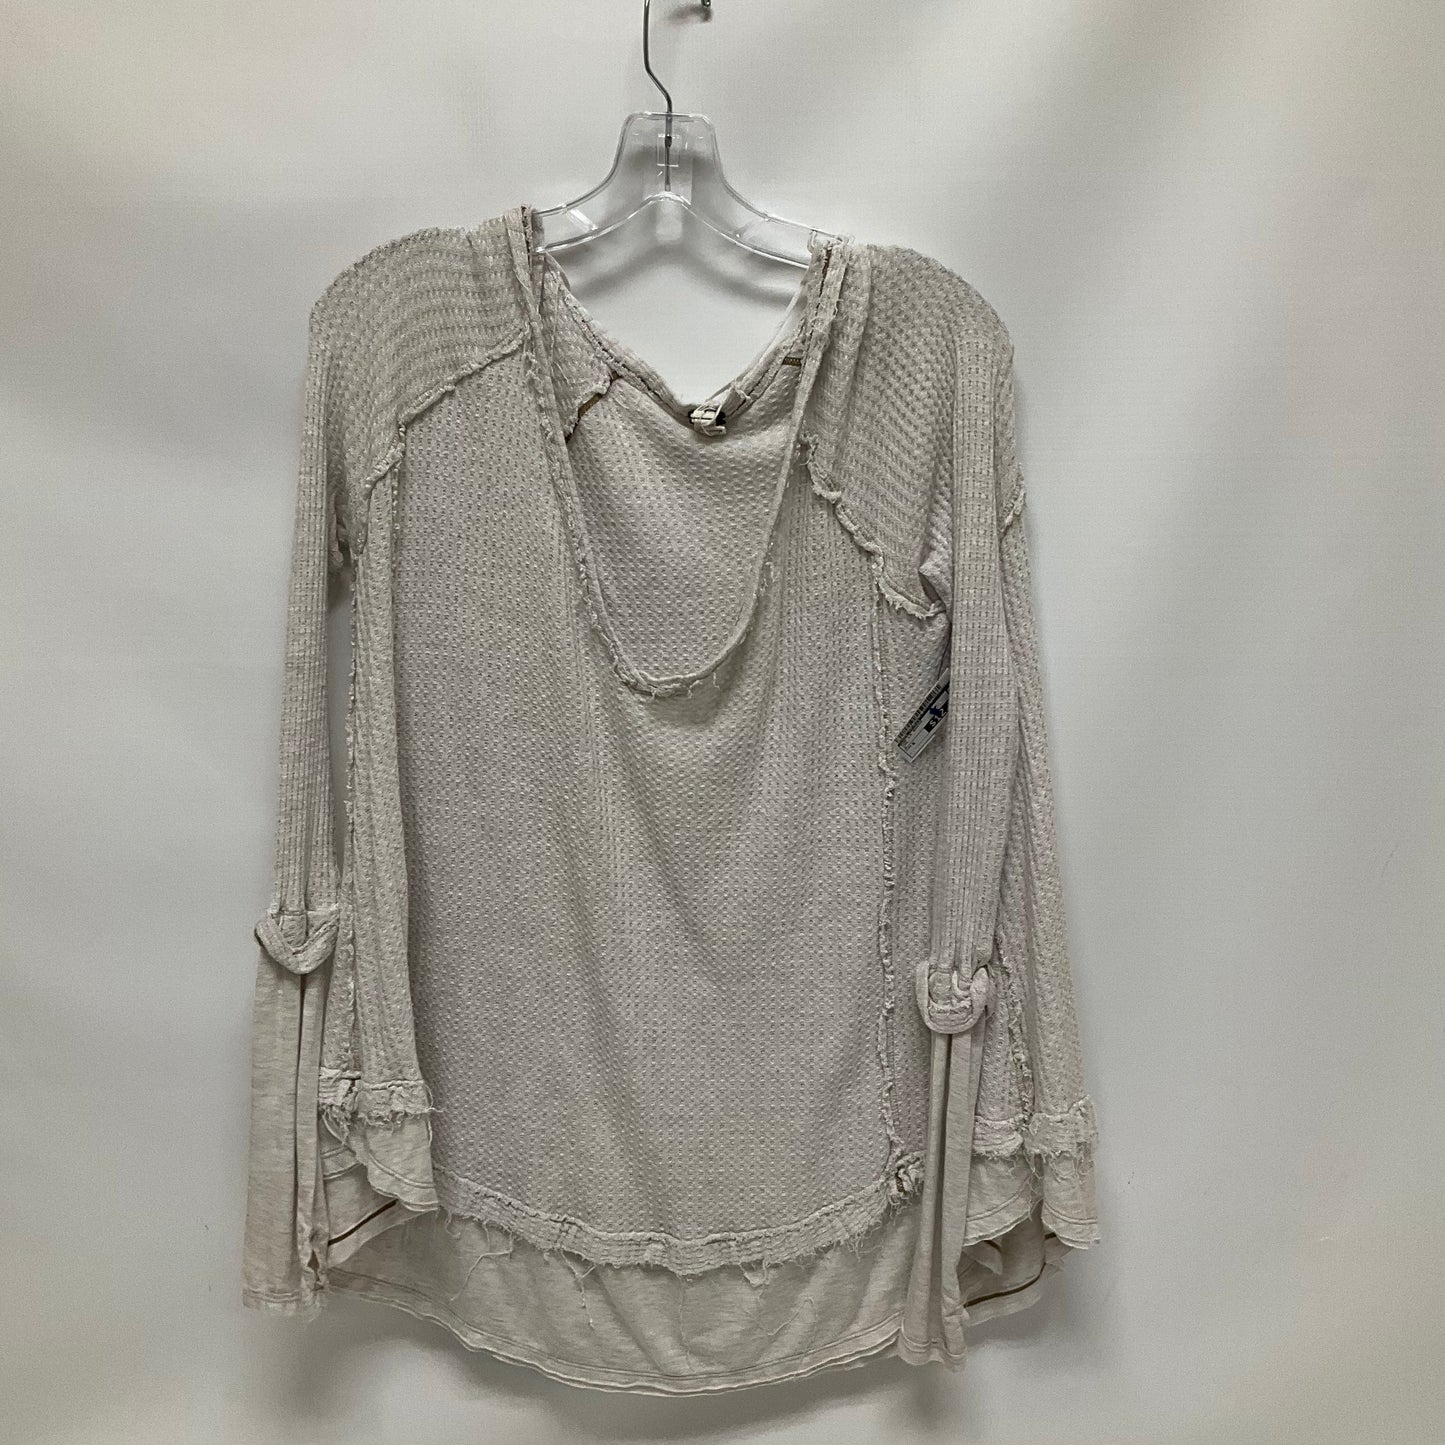 Top Long Sleeve Basic By Free People  Size: S